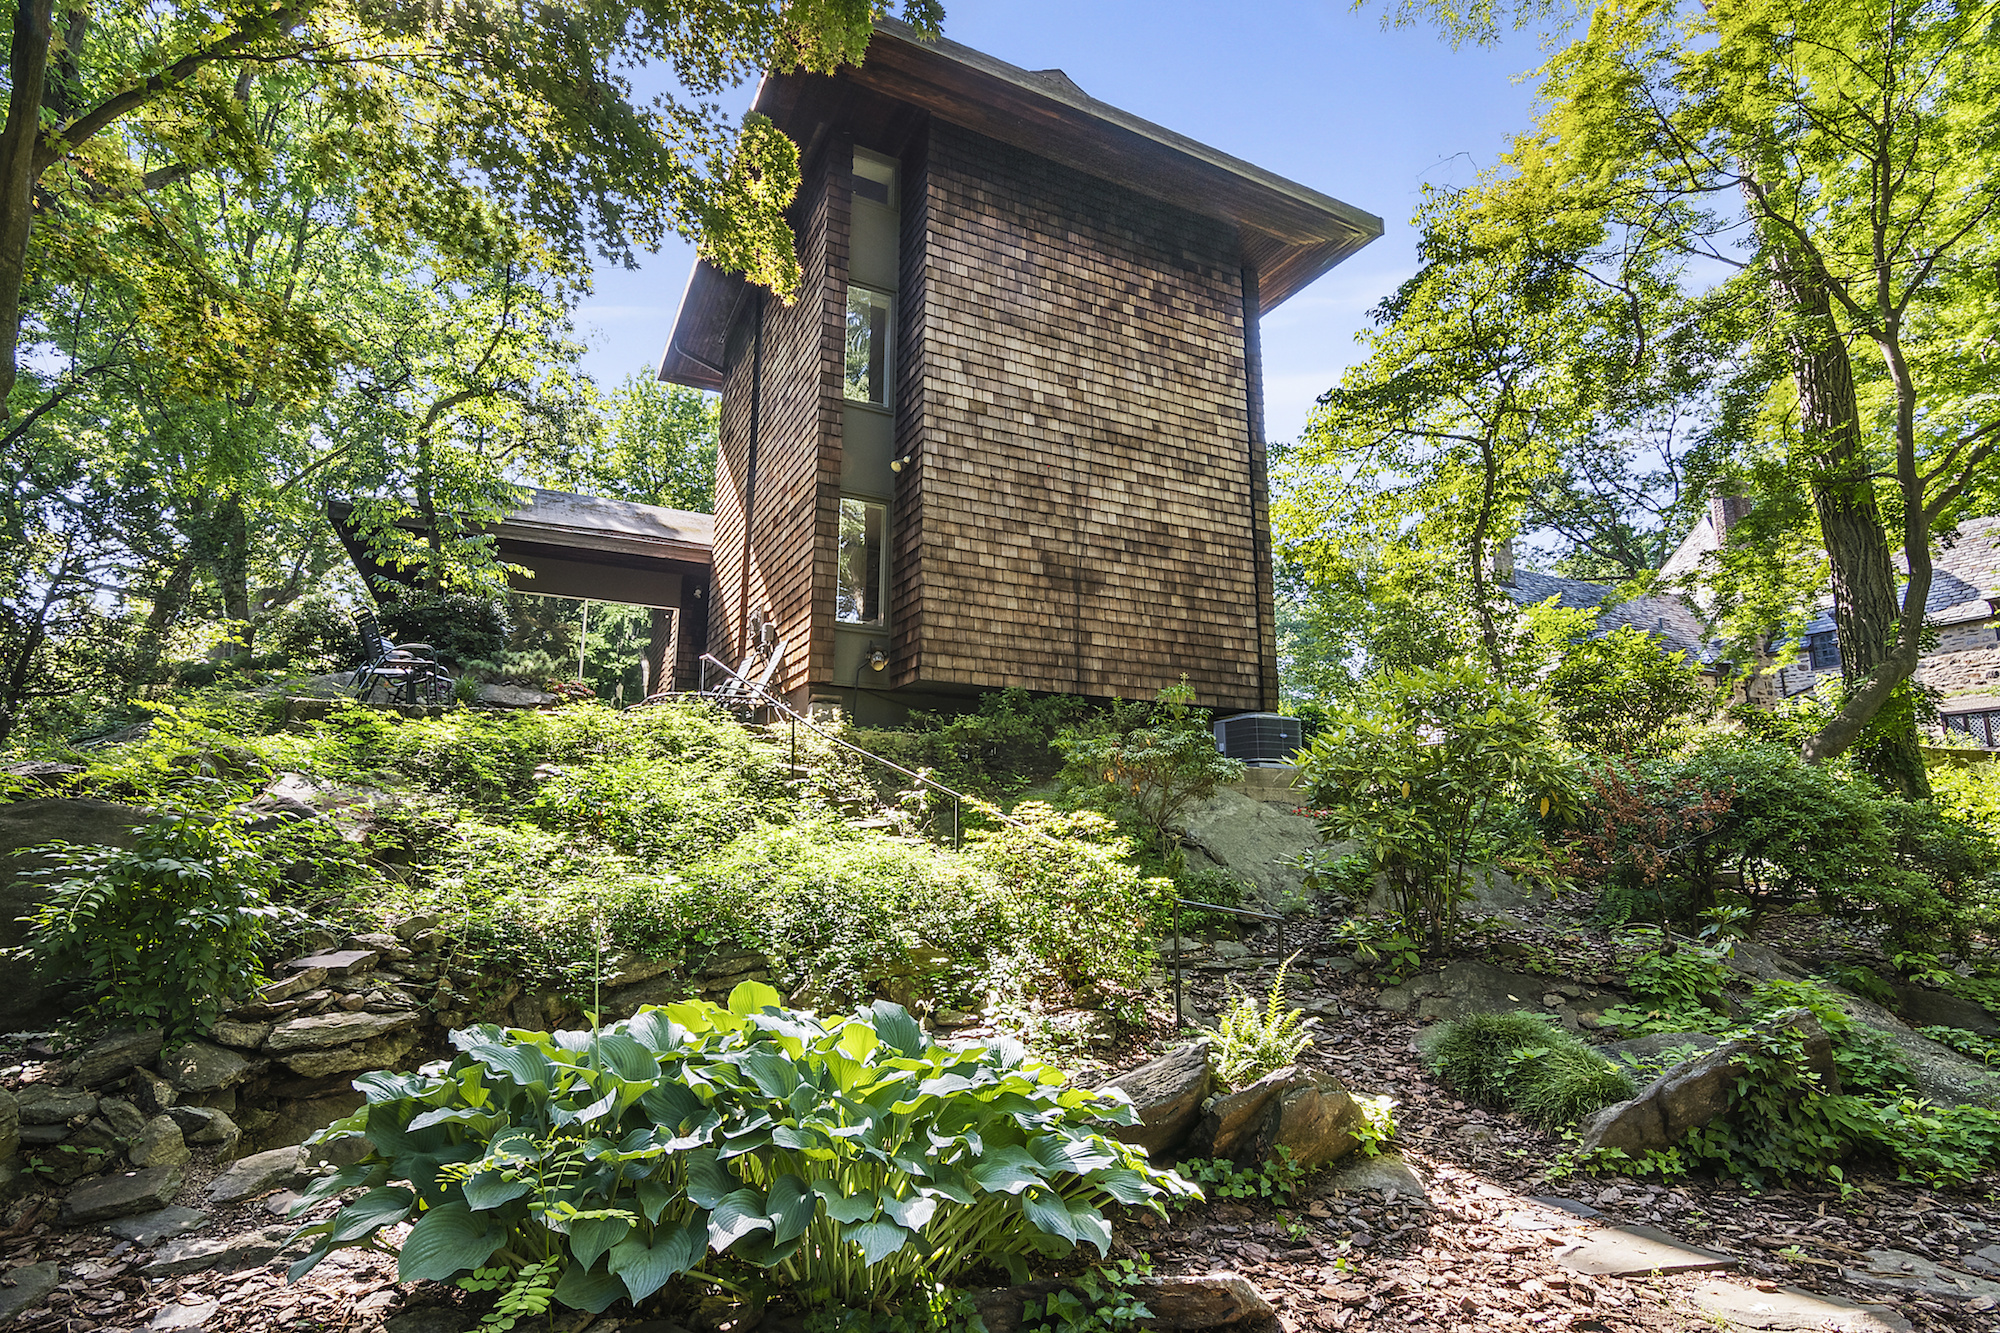 For $1.62M, a mid-century modern home surrounded by woods in the Bronx’s historic Fieldston